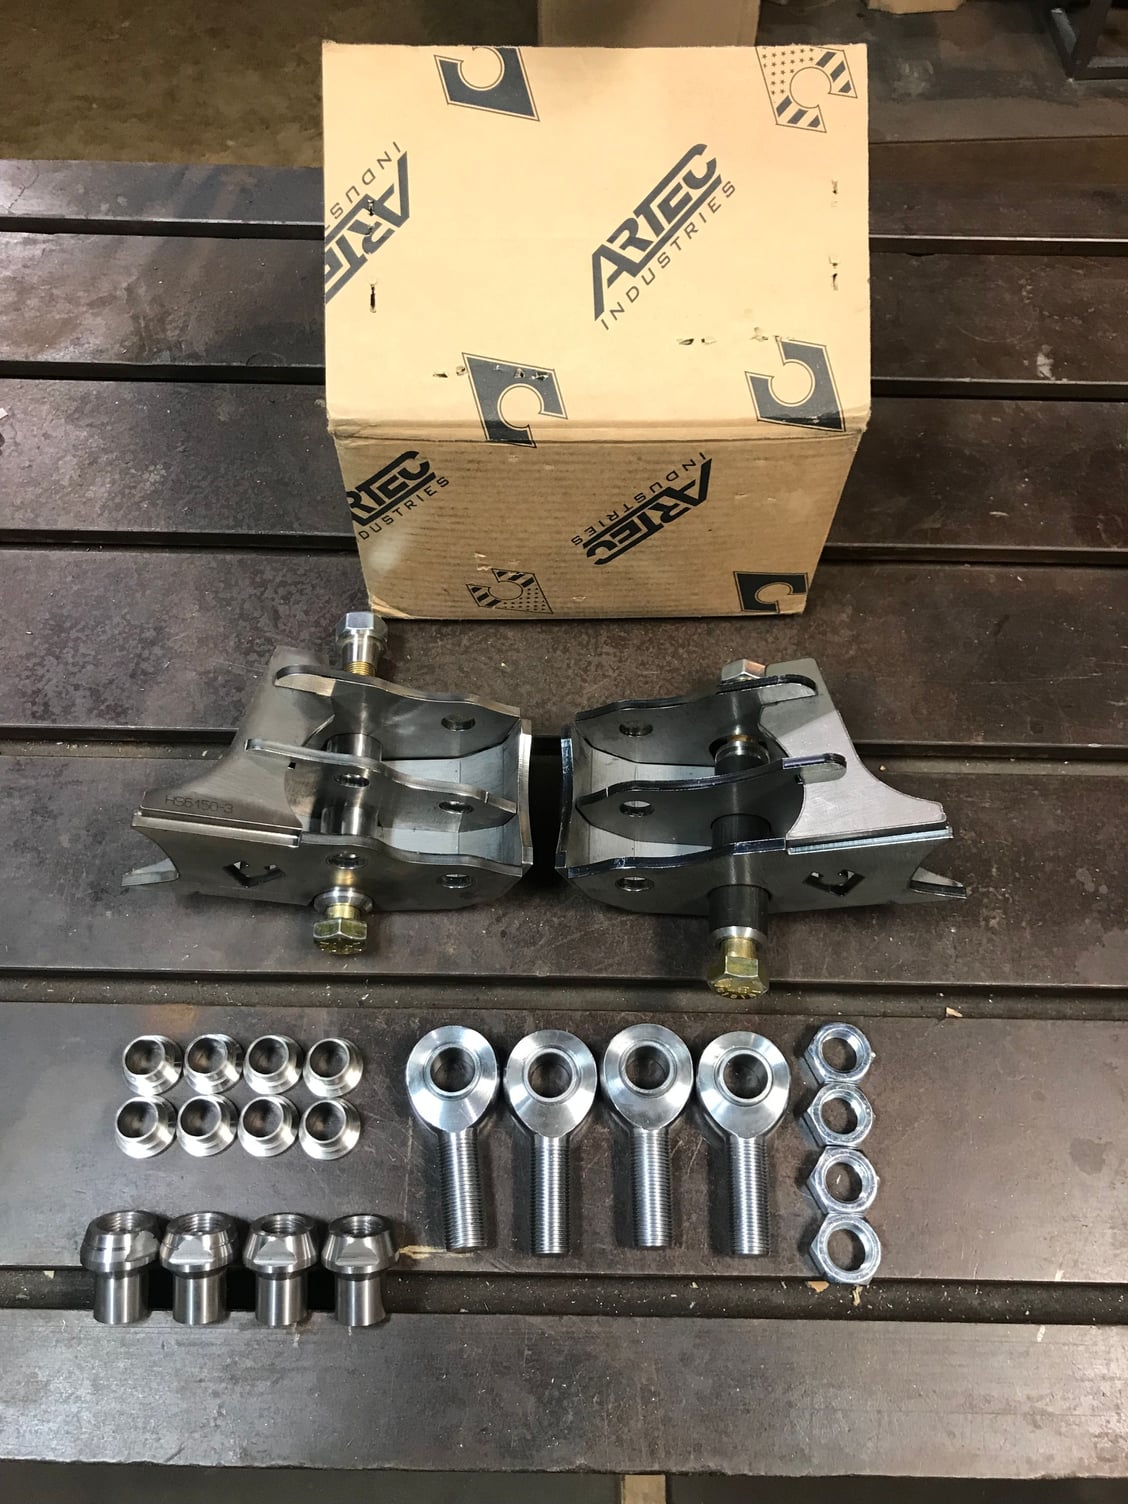 Steering/Suspension - Artec high steer super Duty 05+ - New - All Years Jeep Wrangler - Longview, TX 75604, United States